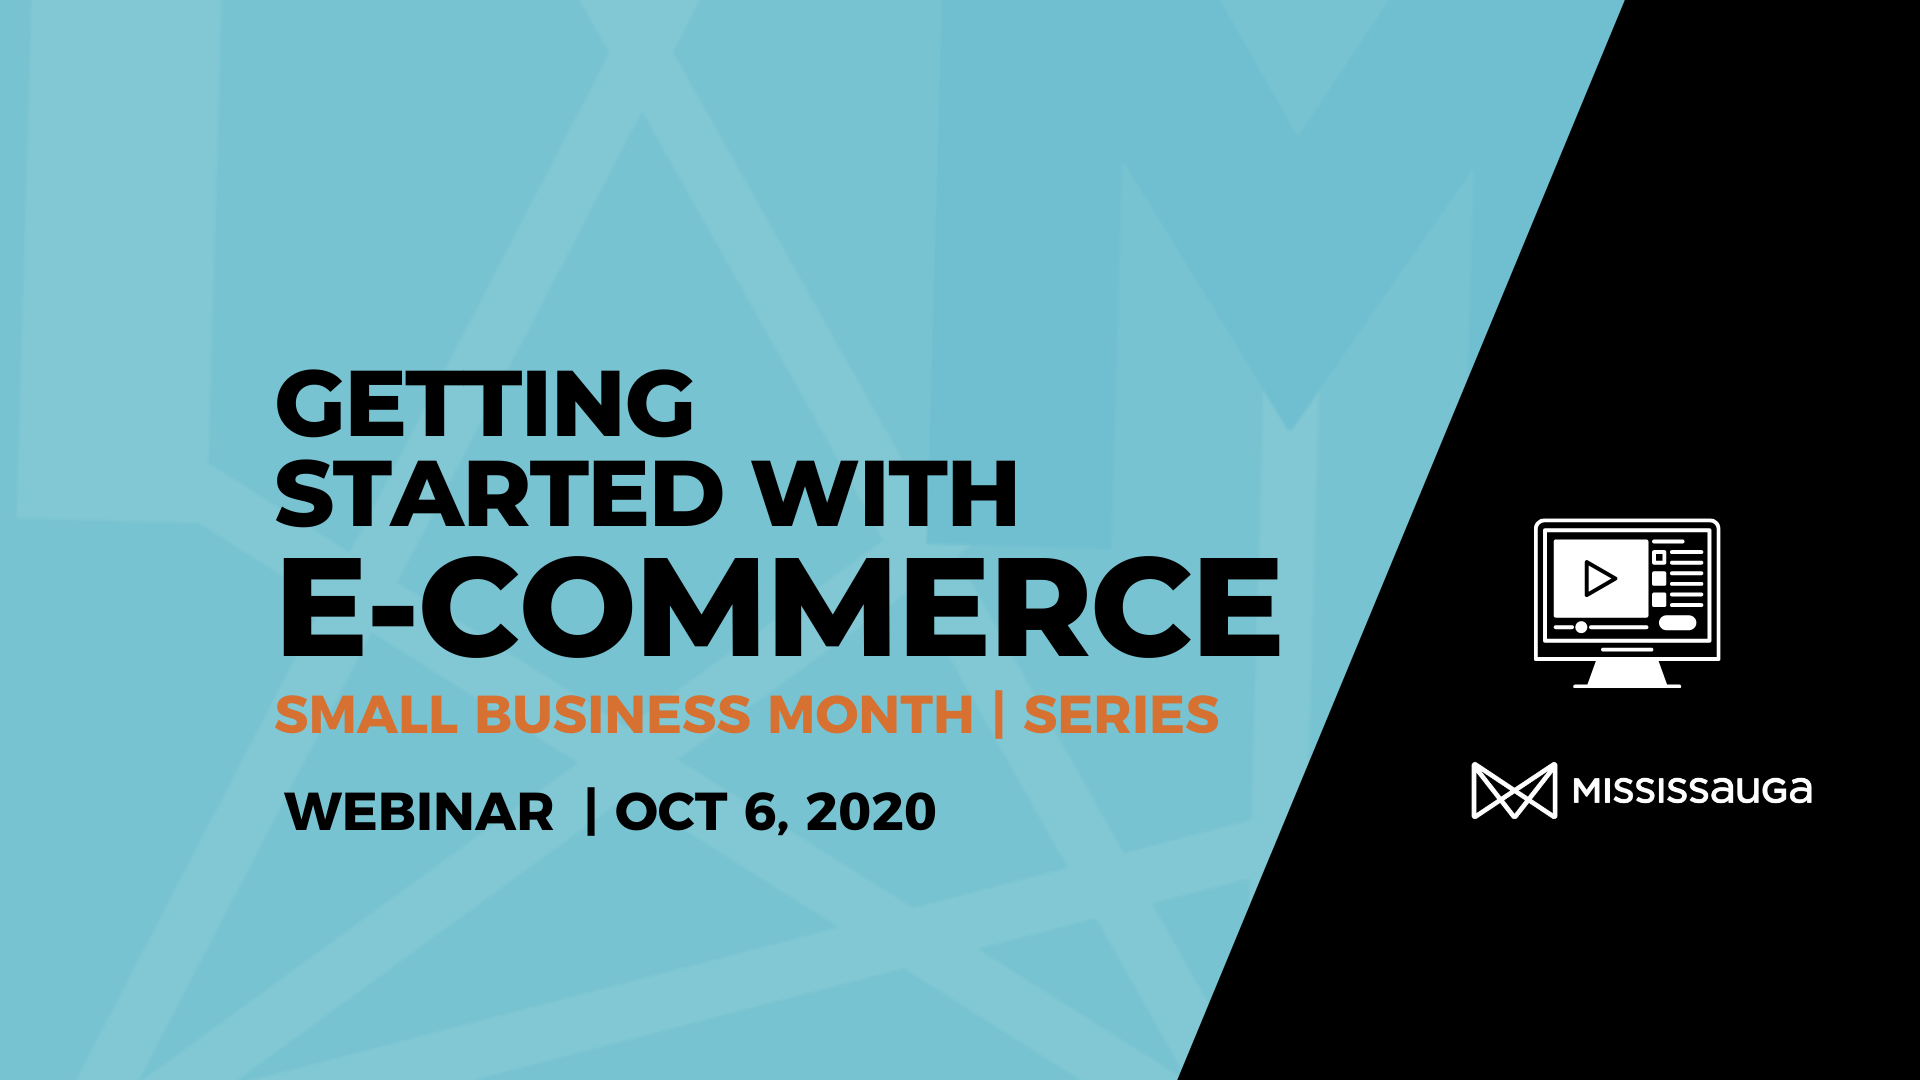 You are currently viewing Getting Started with E-Commerce – Webinar, Oct 6